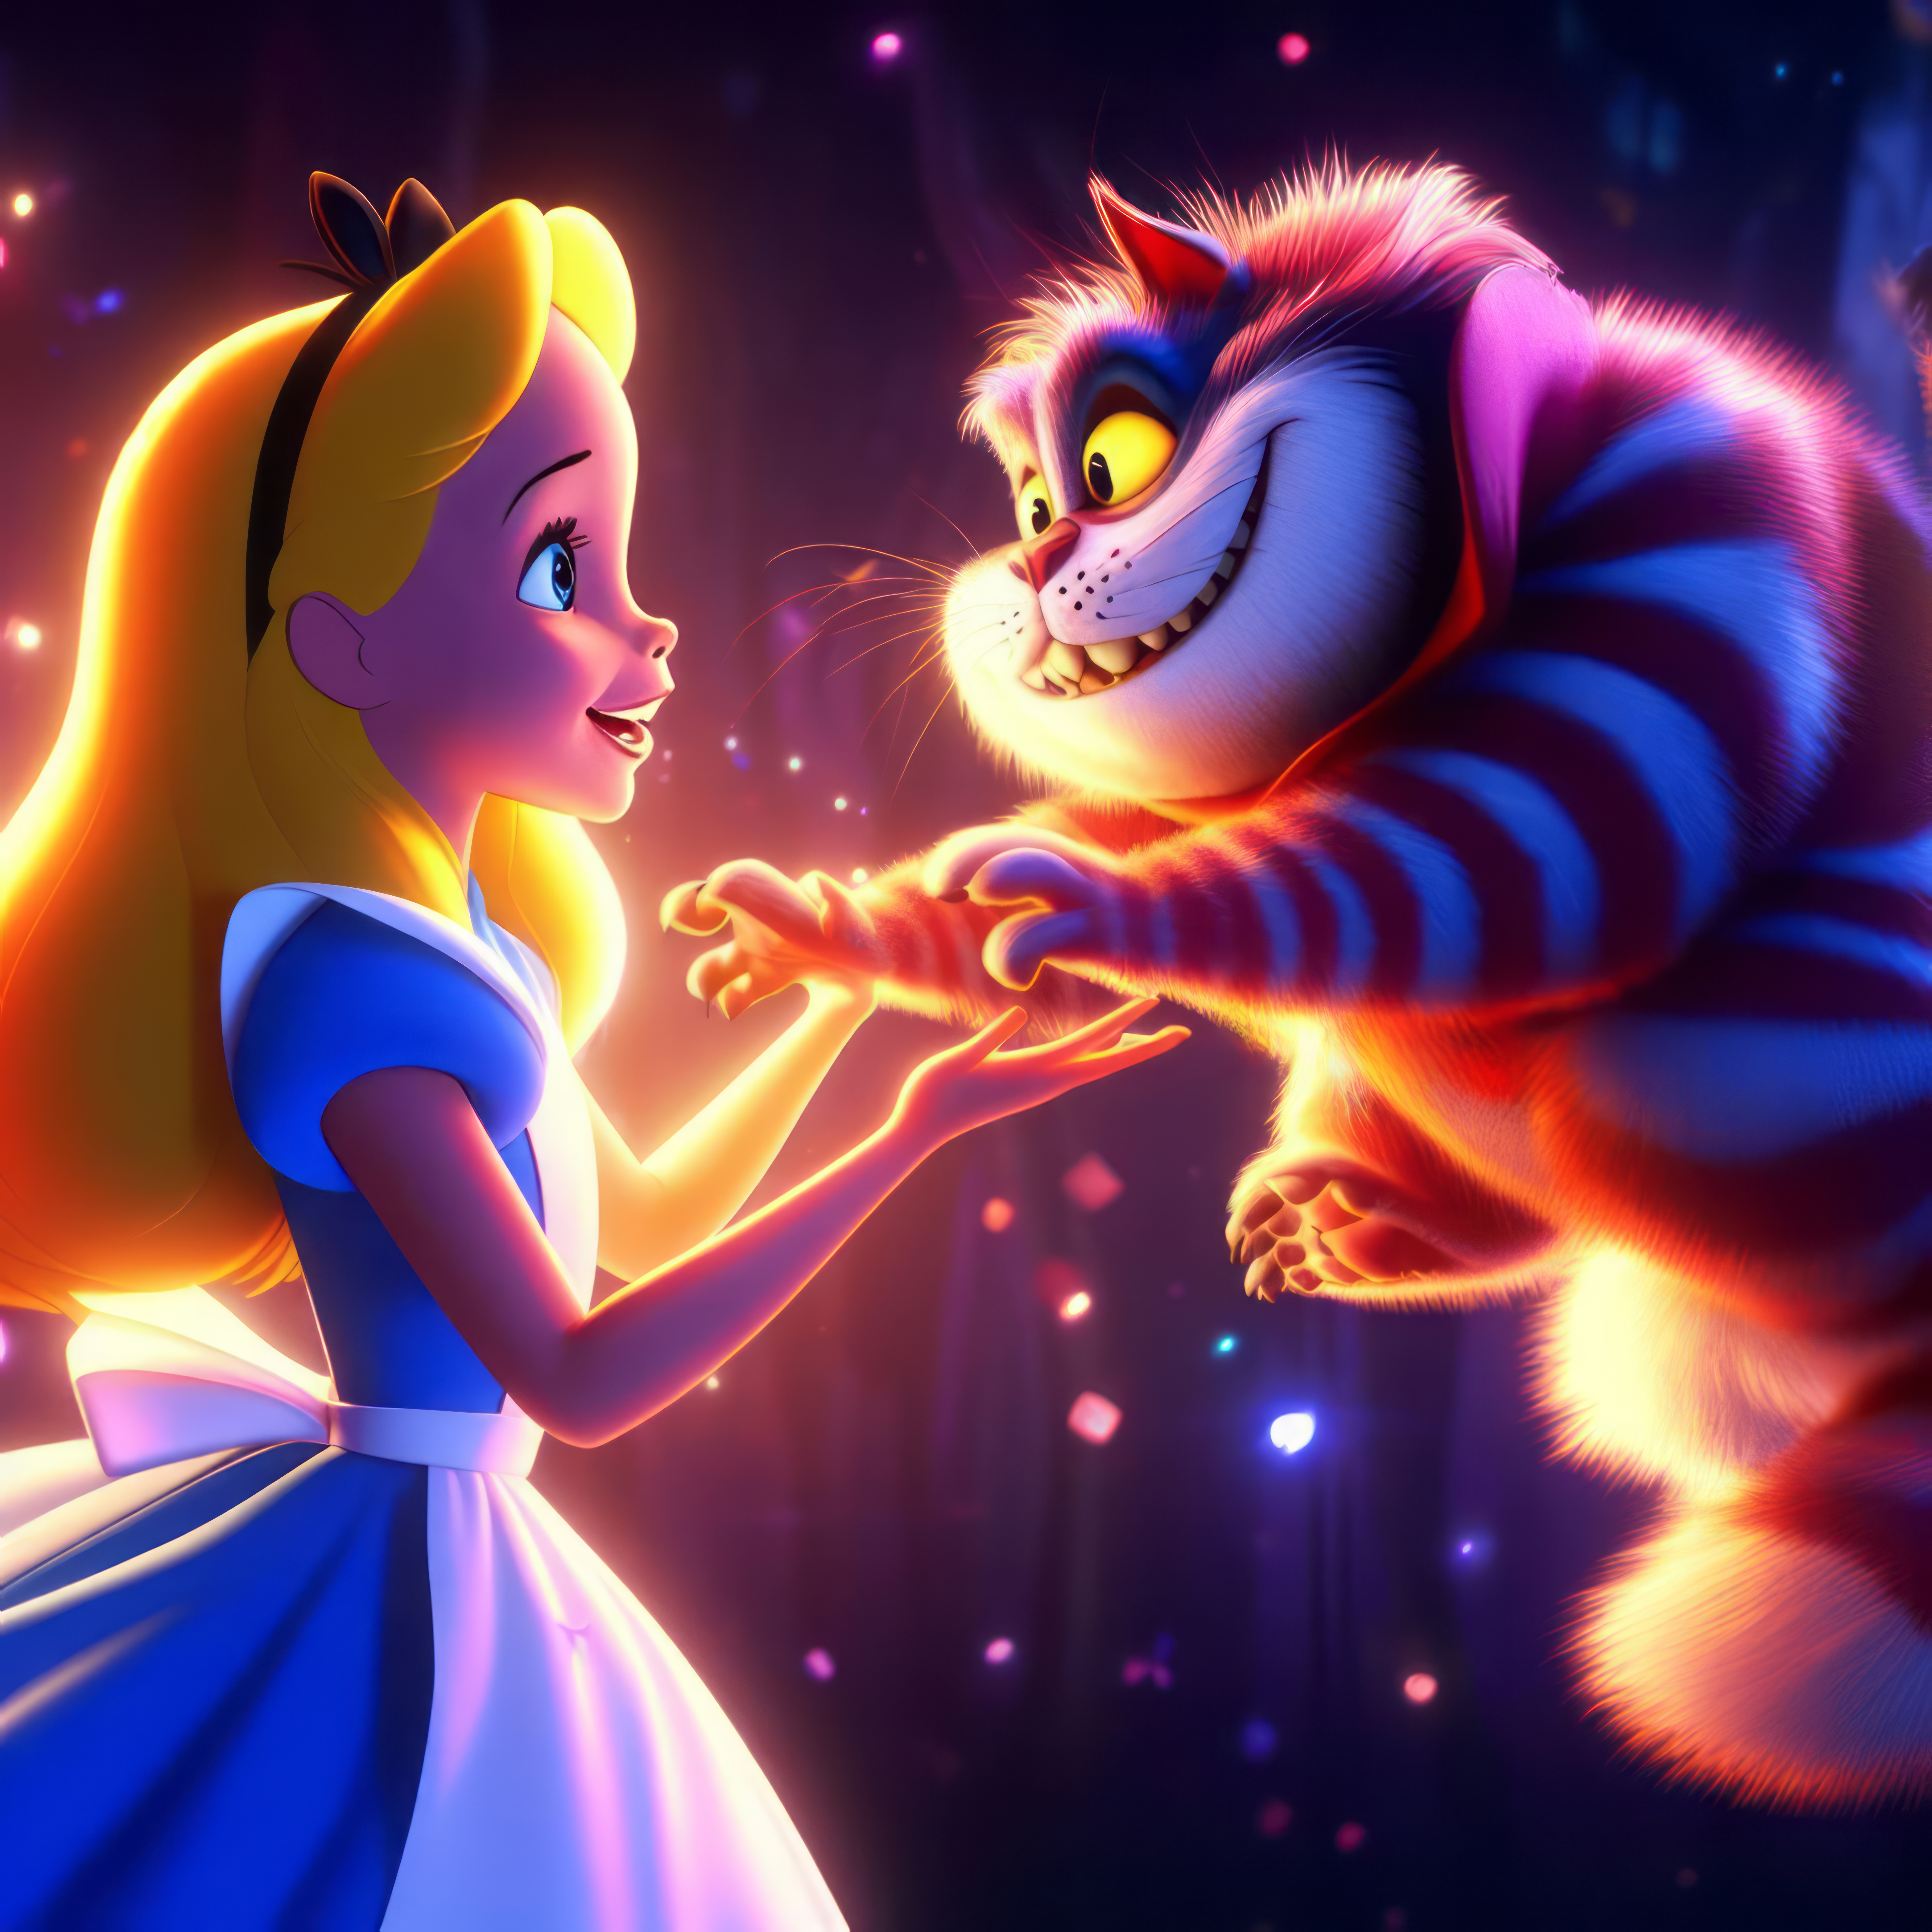 Alice and The Cheshire Cat #1 by RoboPicasso on DeviantArt